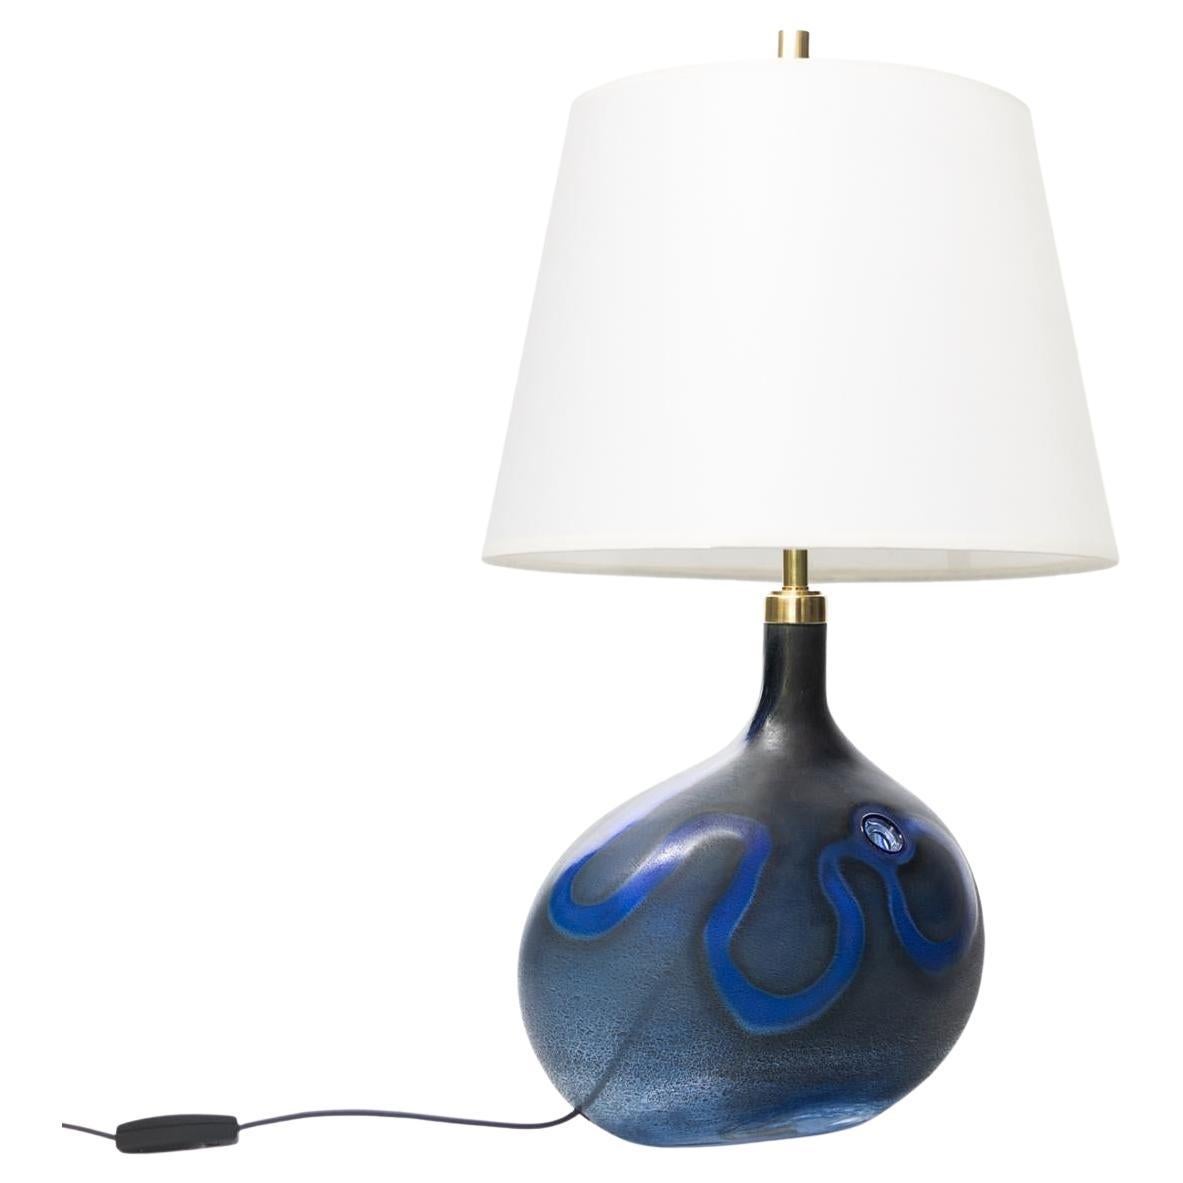 Michael Bang Glass Table Lamp with Asymmetrical Shape, for Holmegaard, Denmark